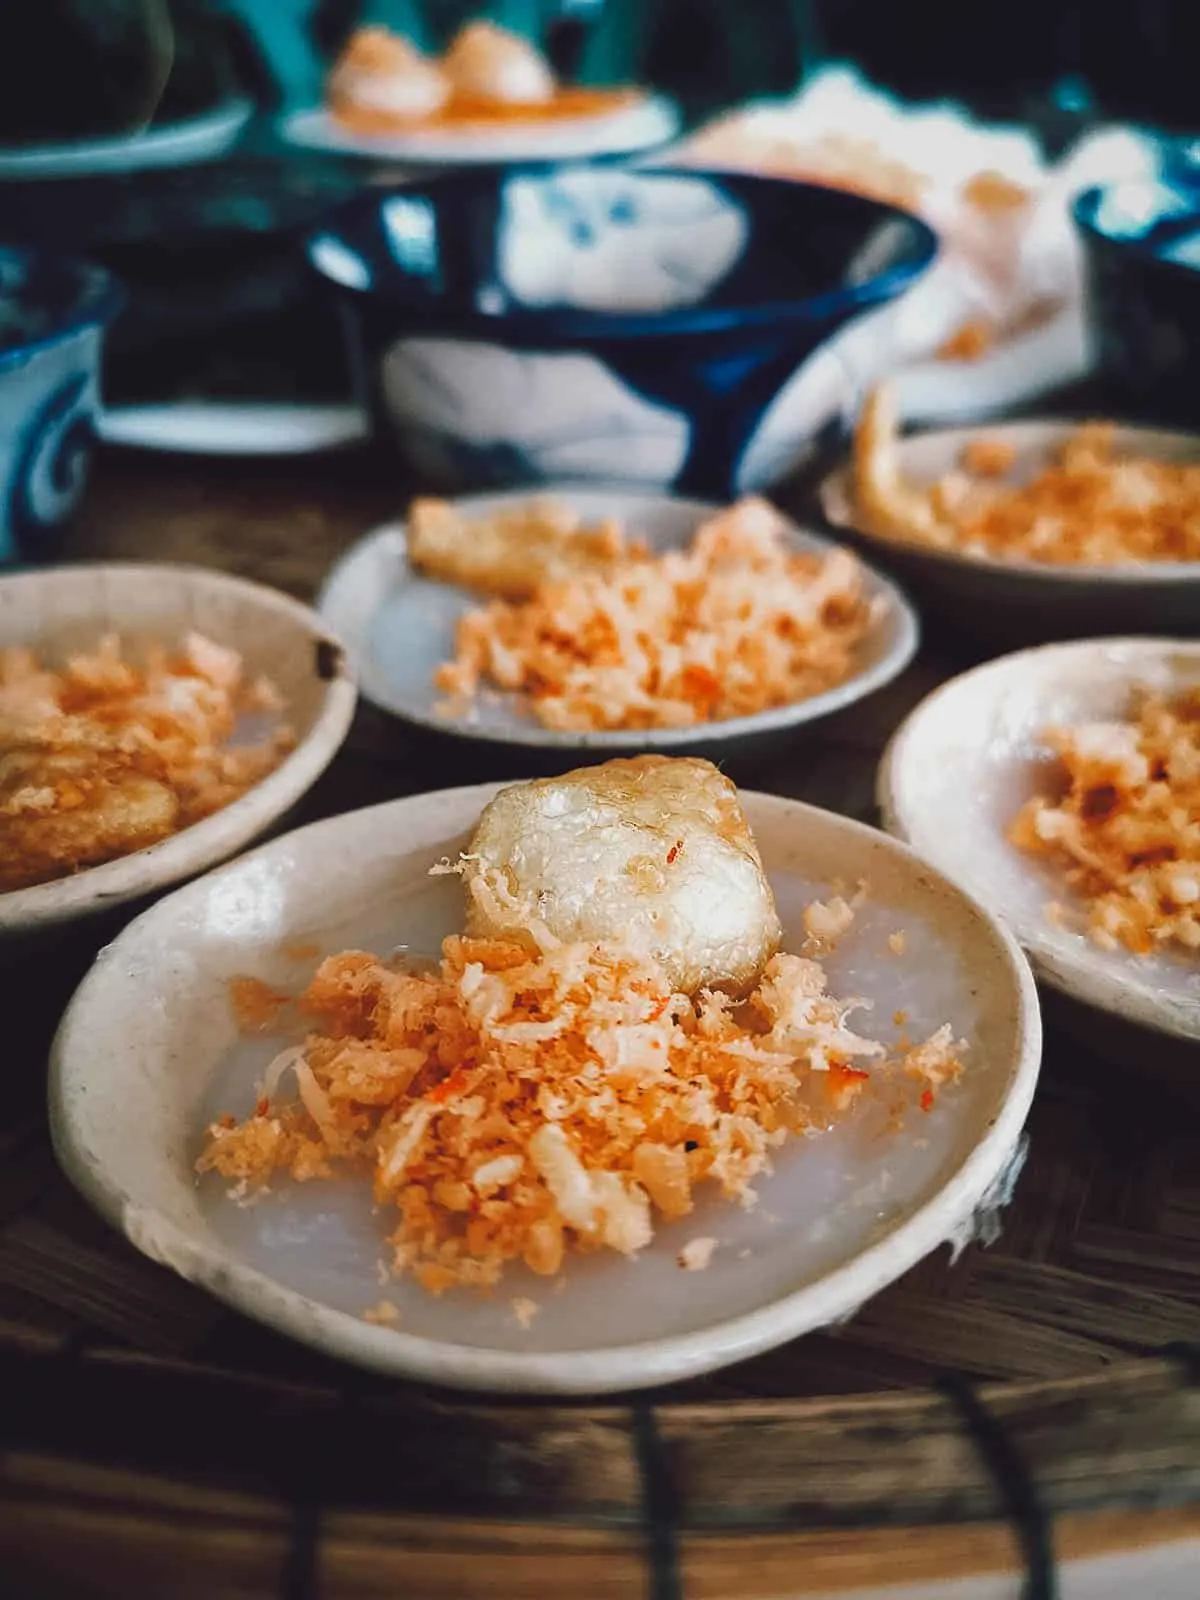 Banh beo steamed rice cakes at Hang Me Me restaurant in Hue, Vietnam